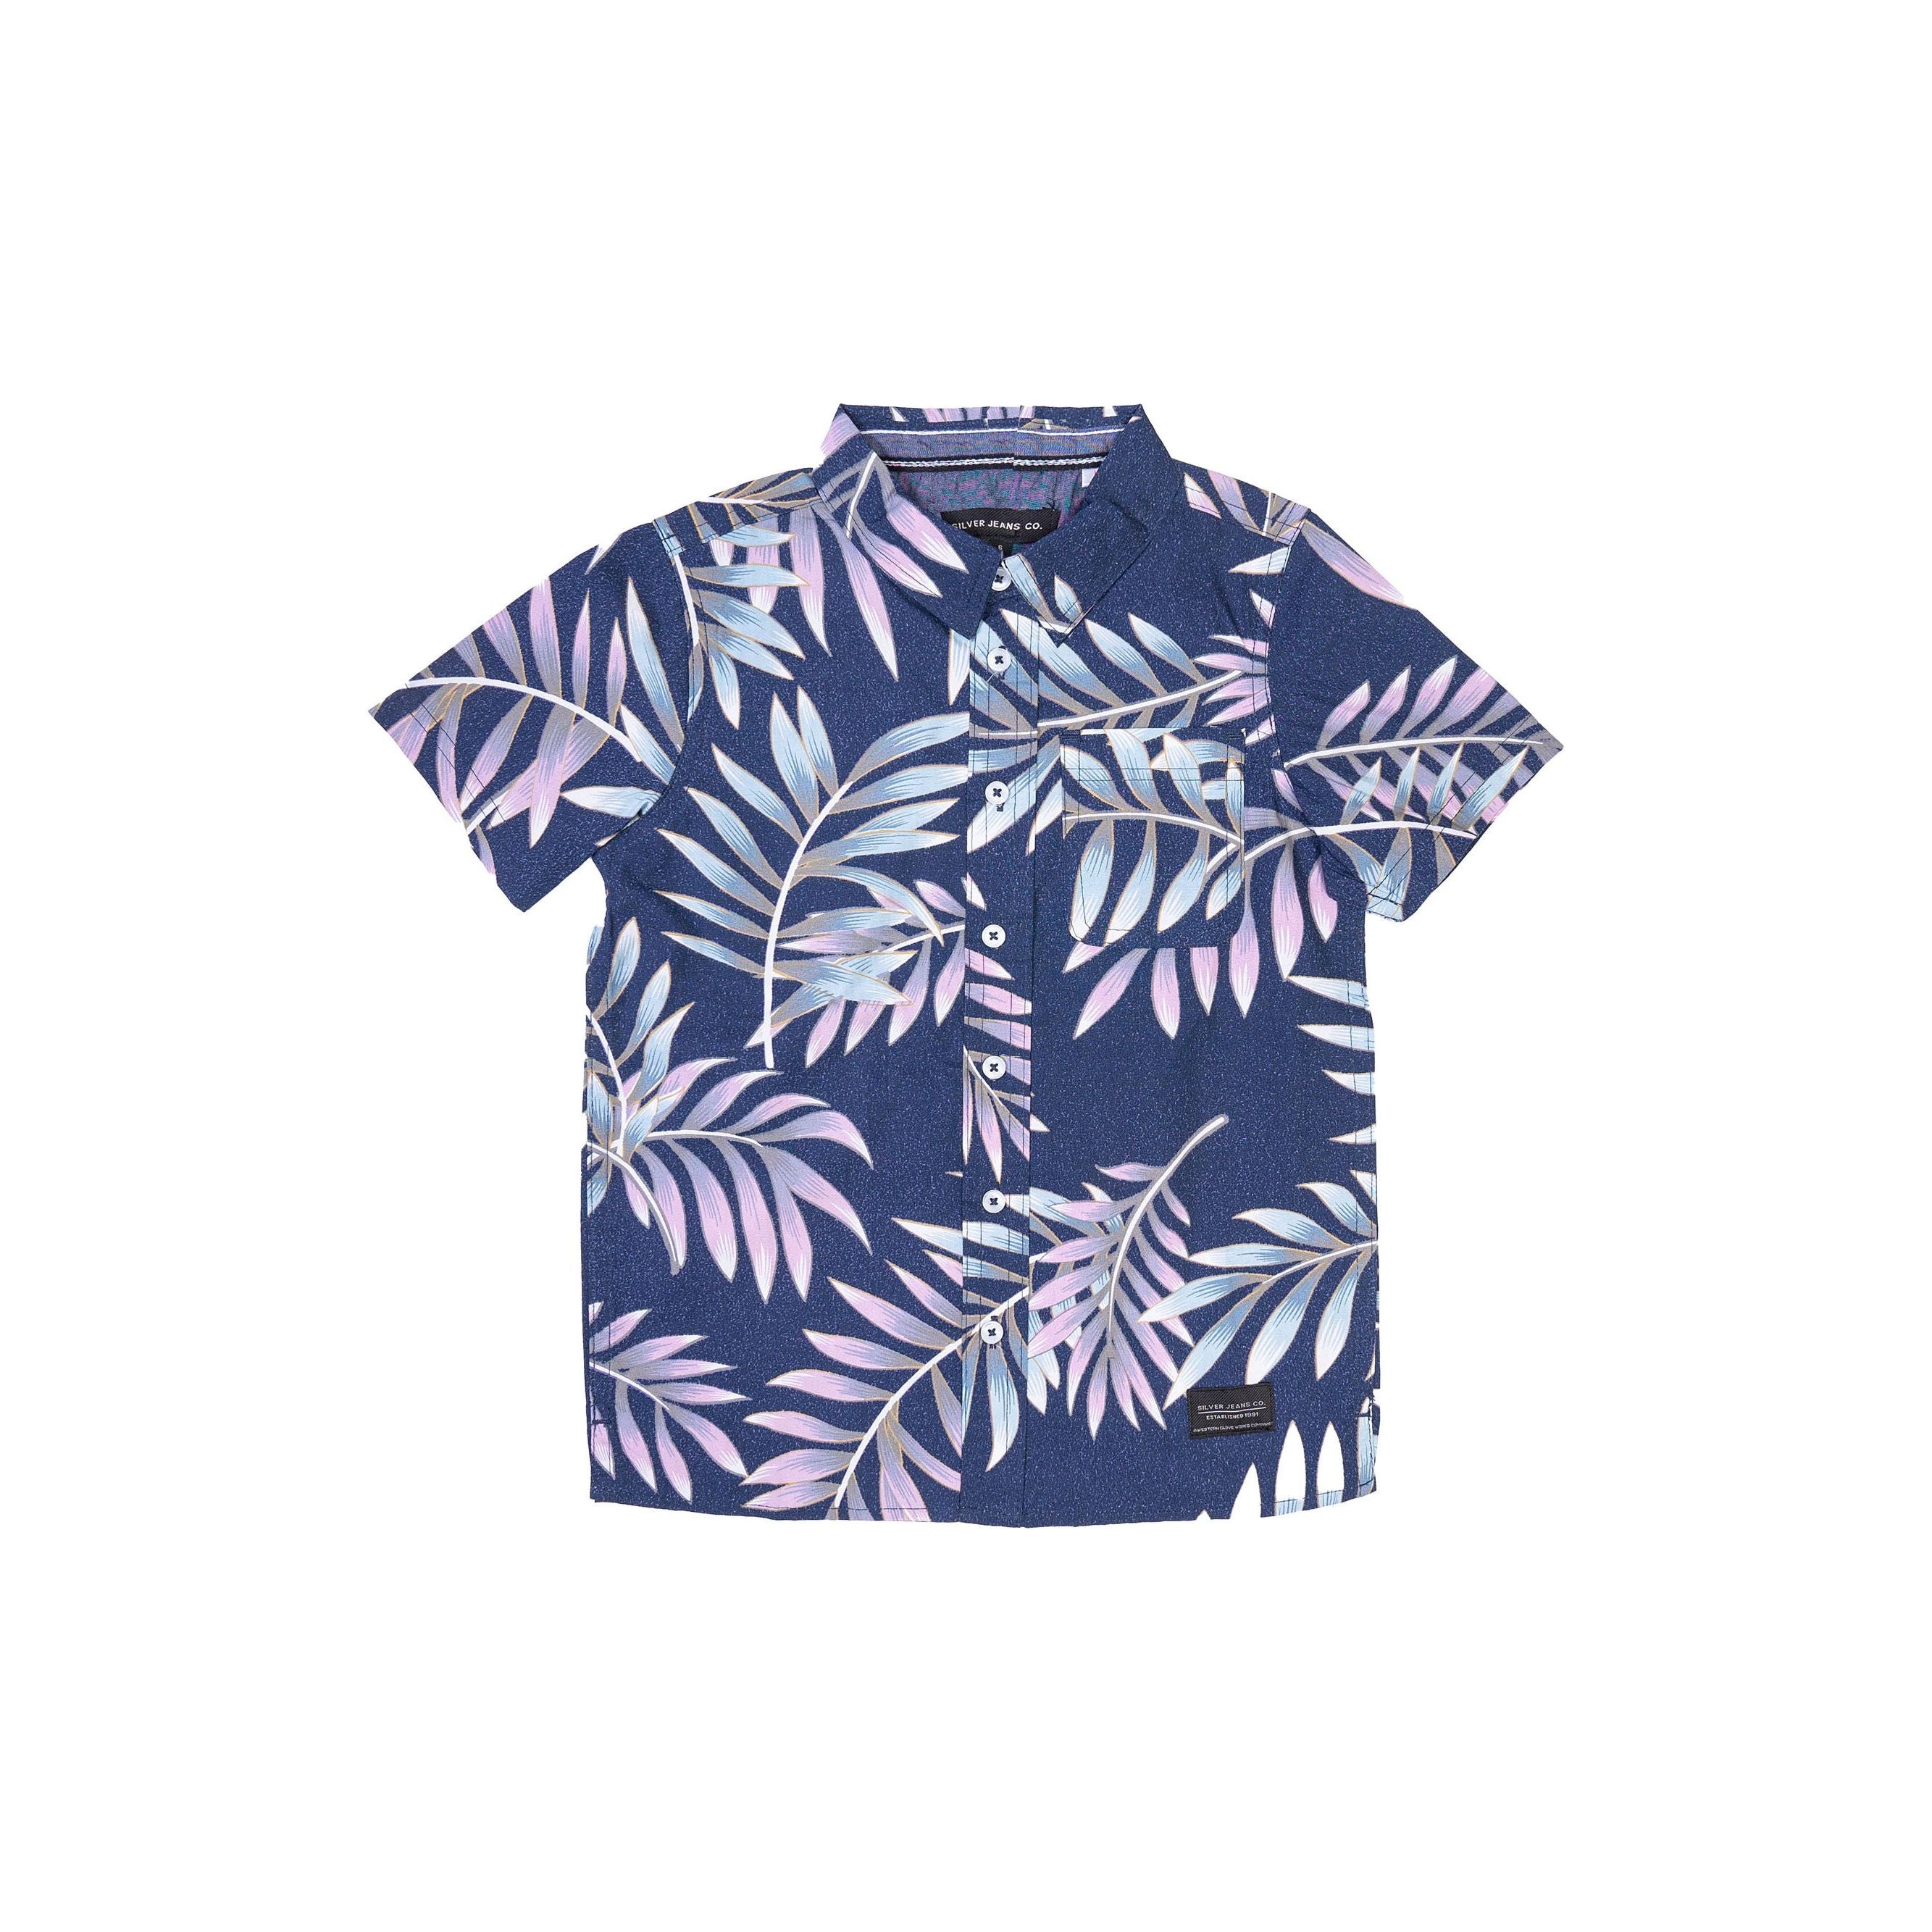 Silver Jeans - Boys Button Up Shirt in Navy Palms